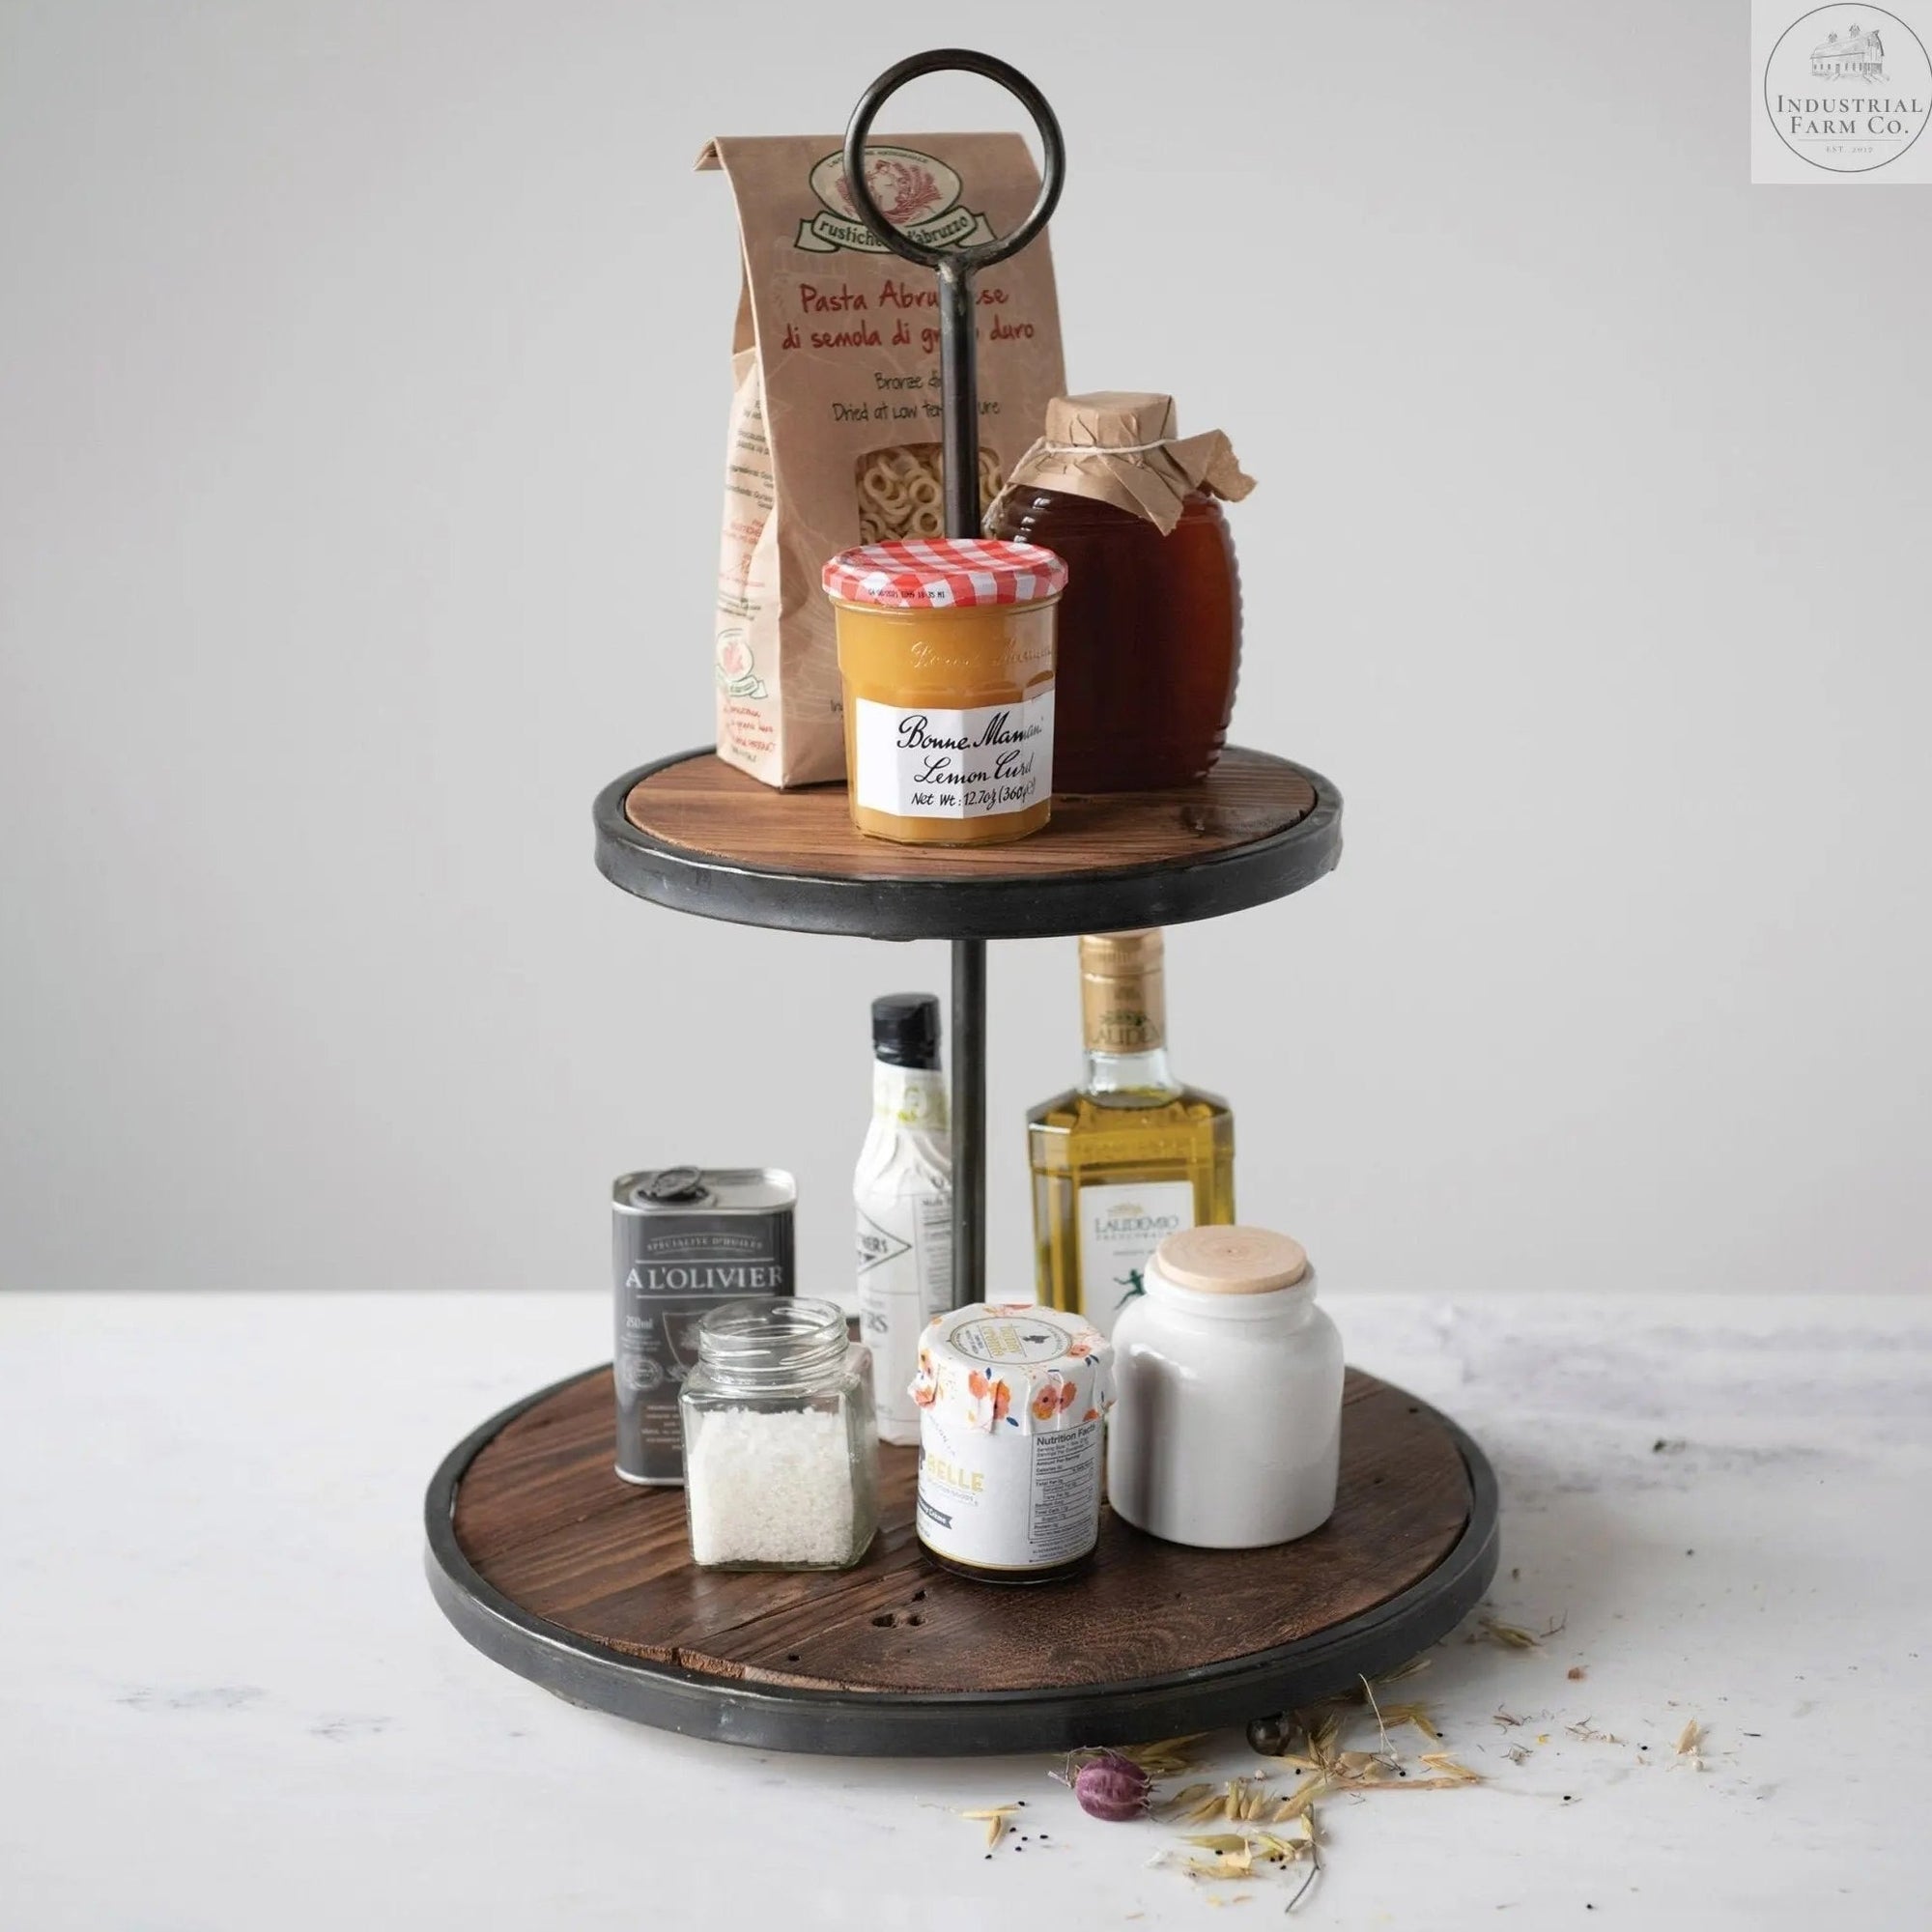 Rustic Tiered Tray  Default Title   | Industrial Farm Co